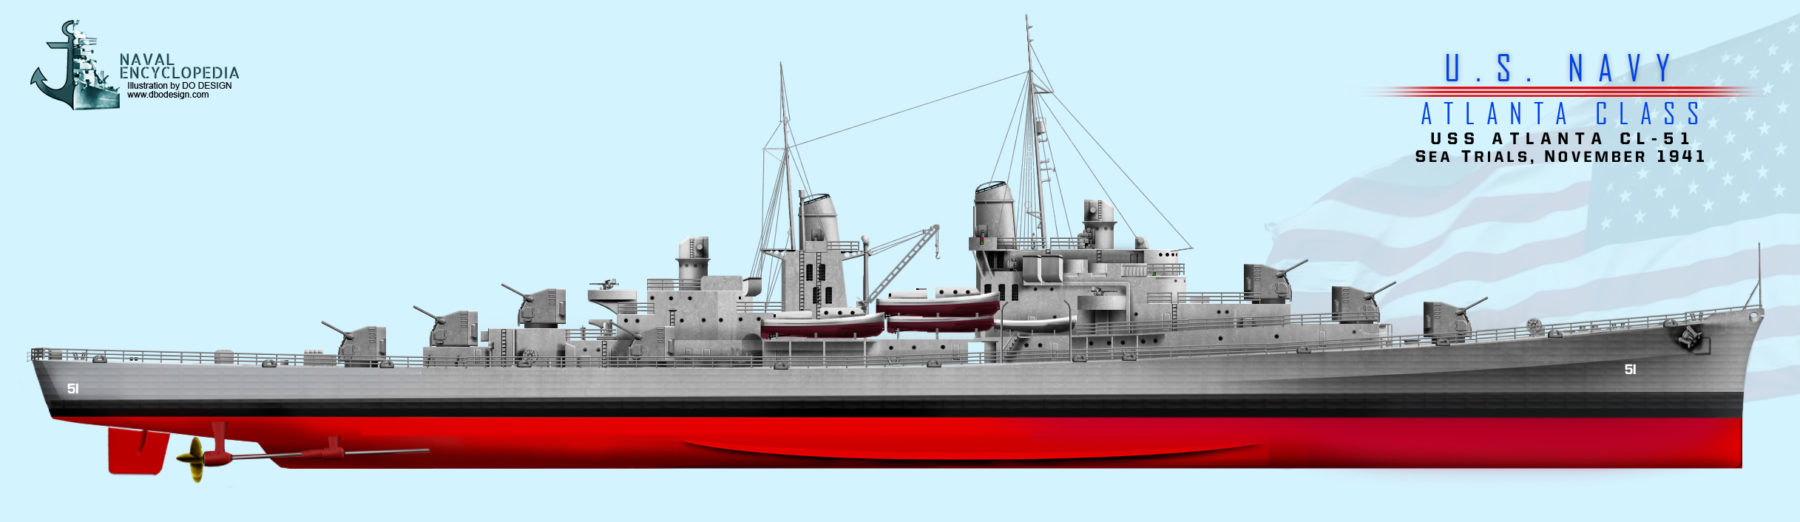 USS Indianapolis as built, before commission